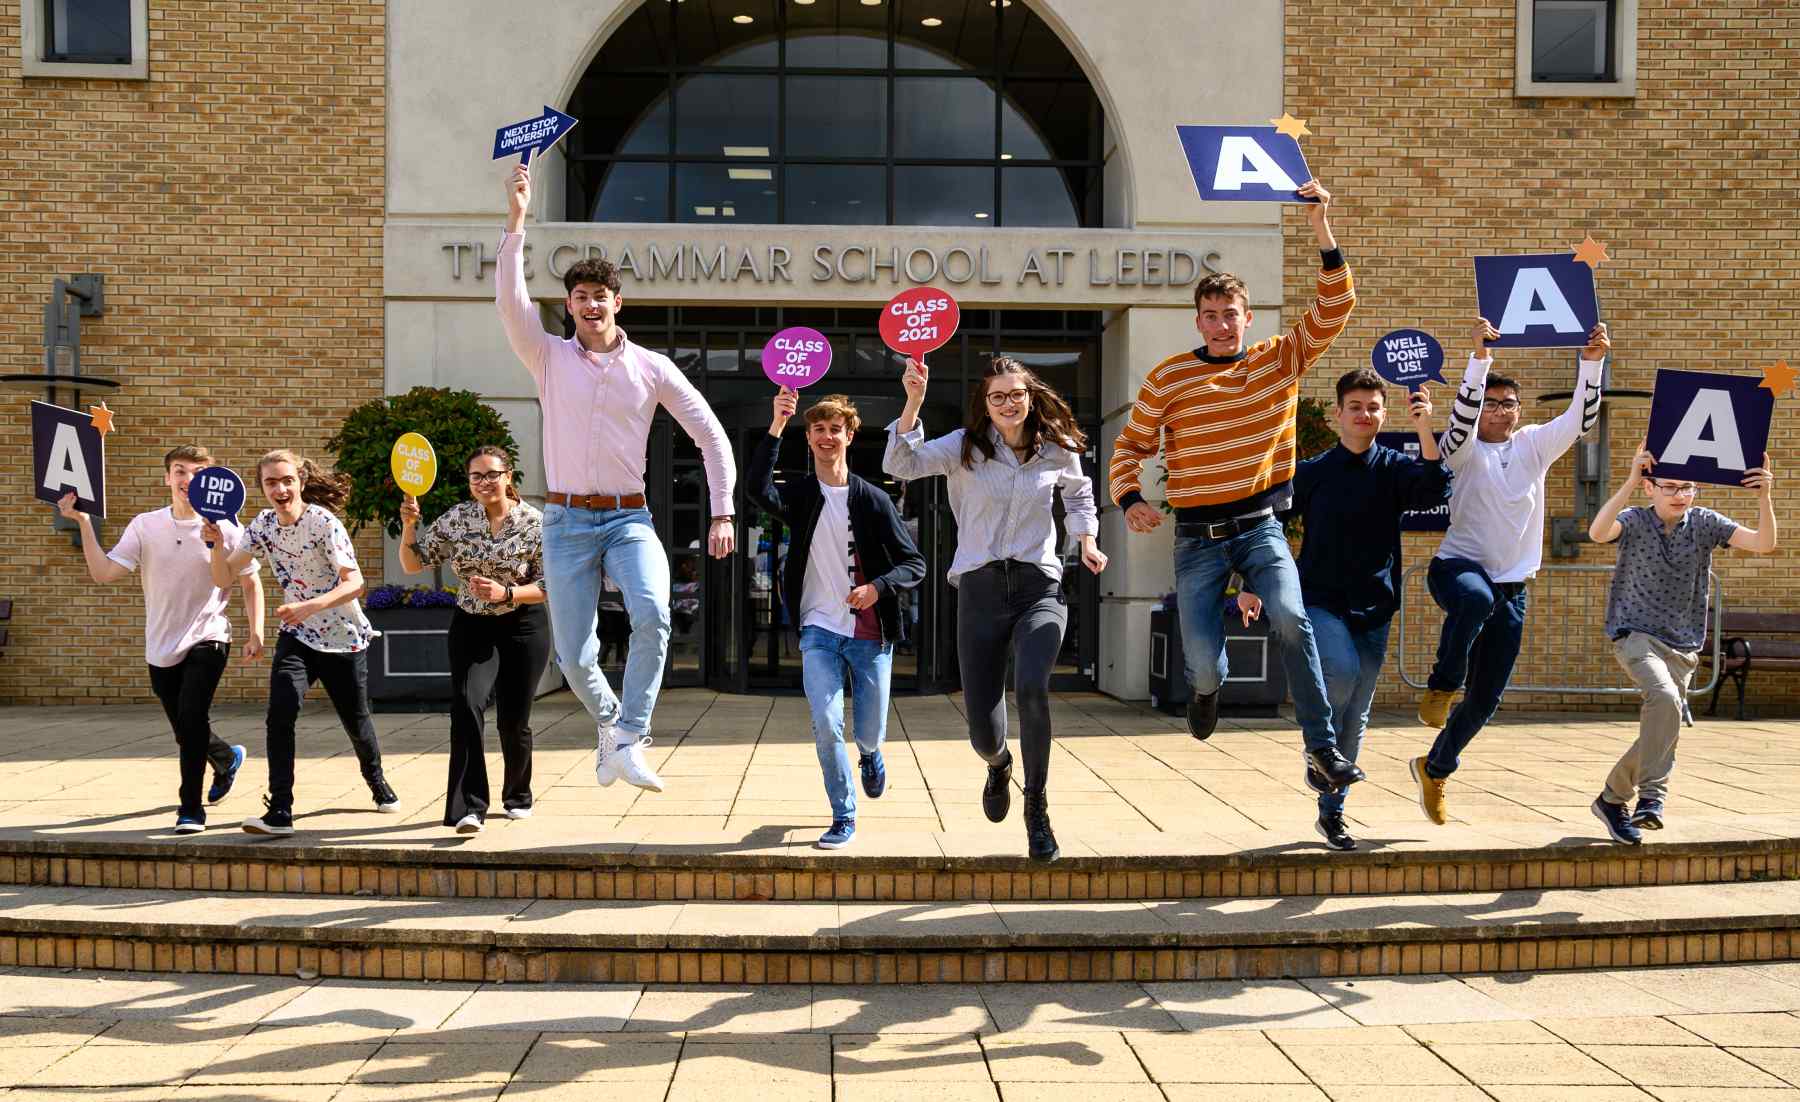 Students at The Grammar School at Leeds celebrate their A-level results